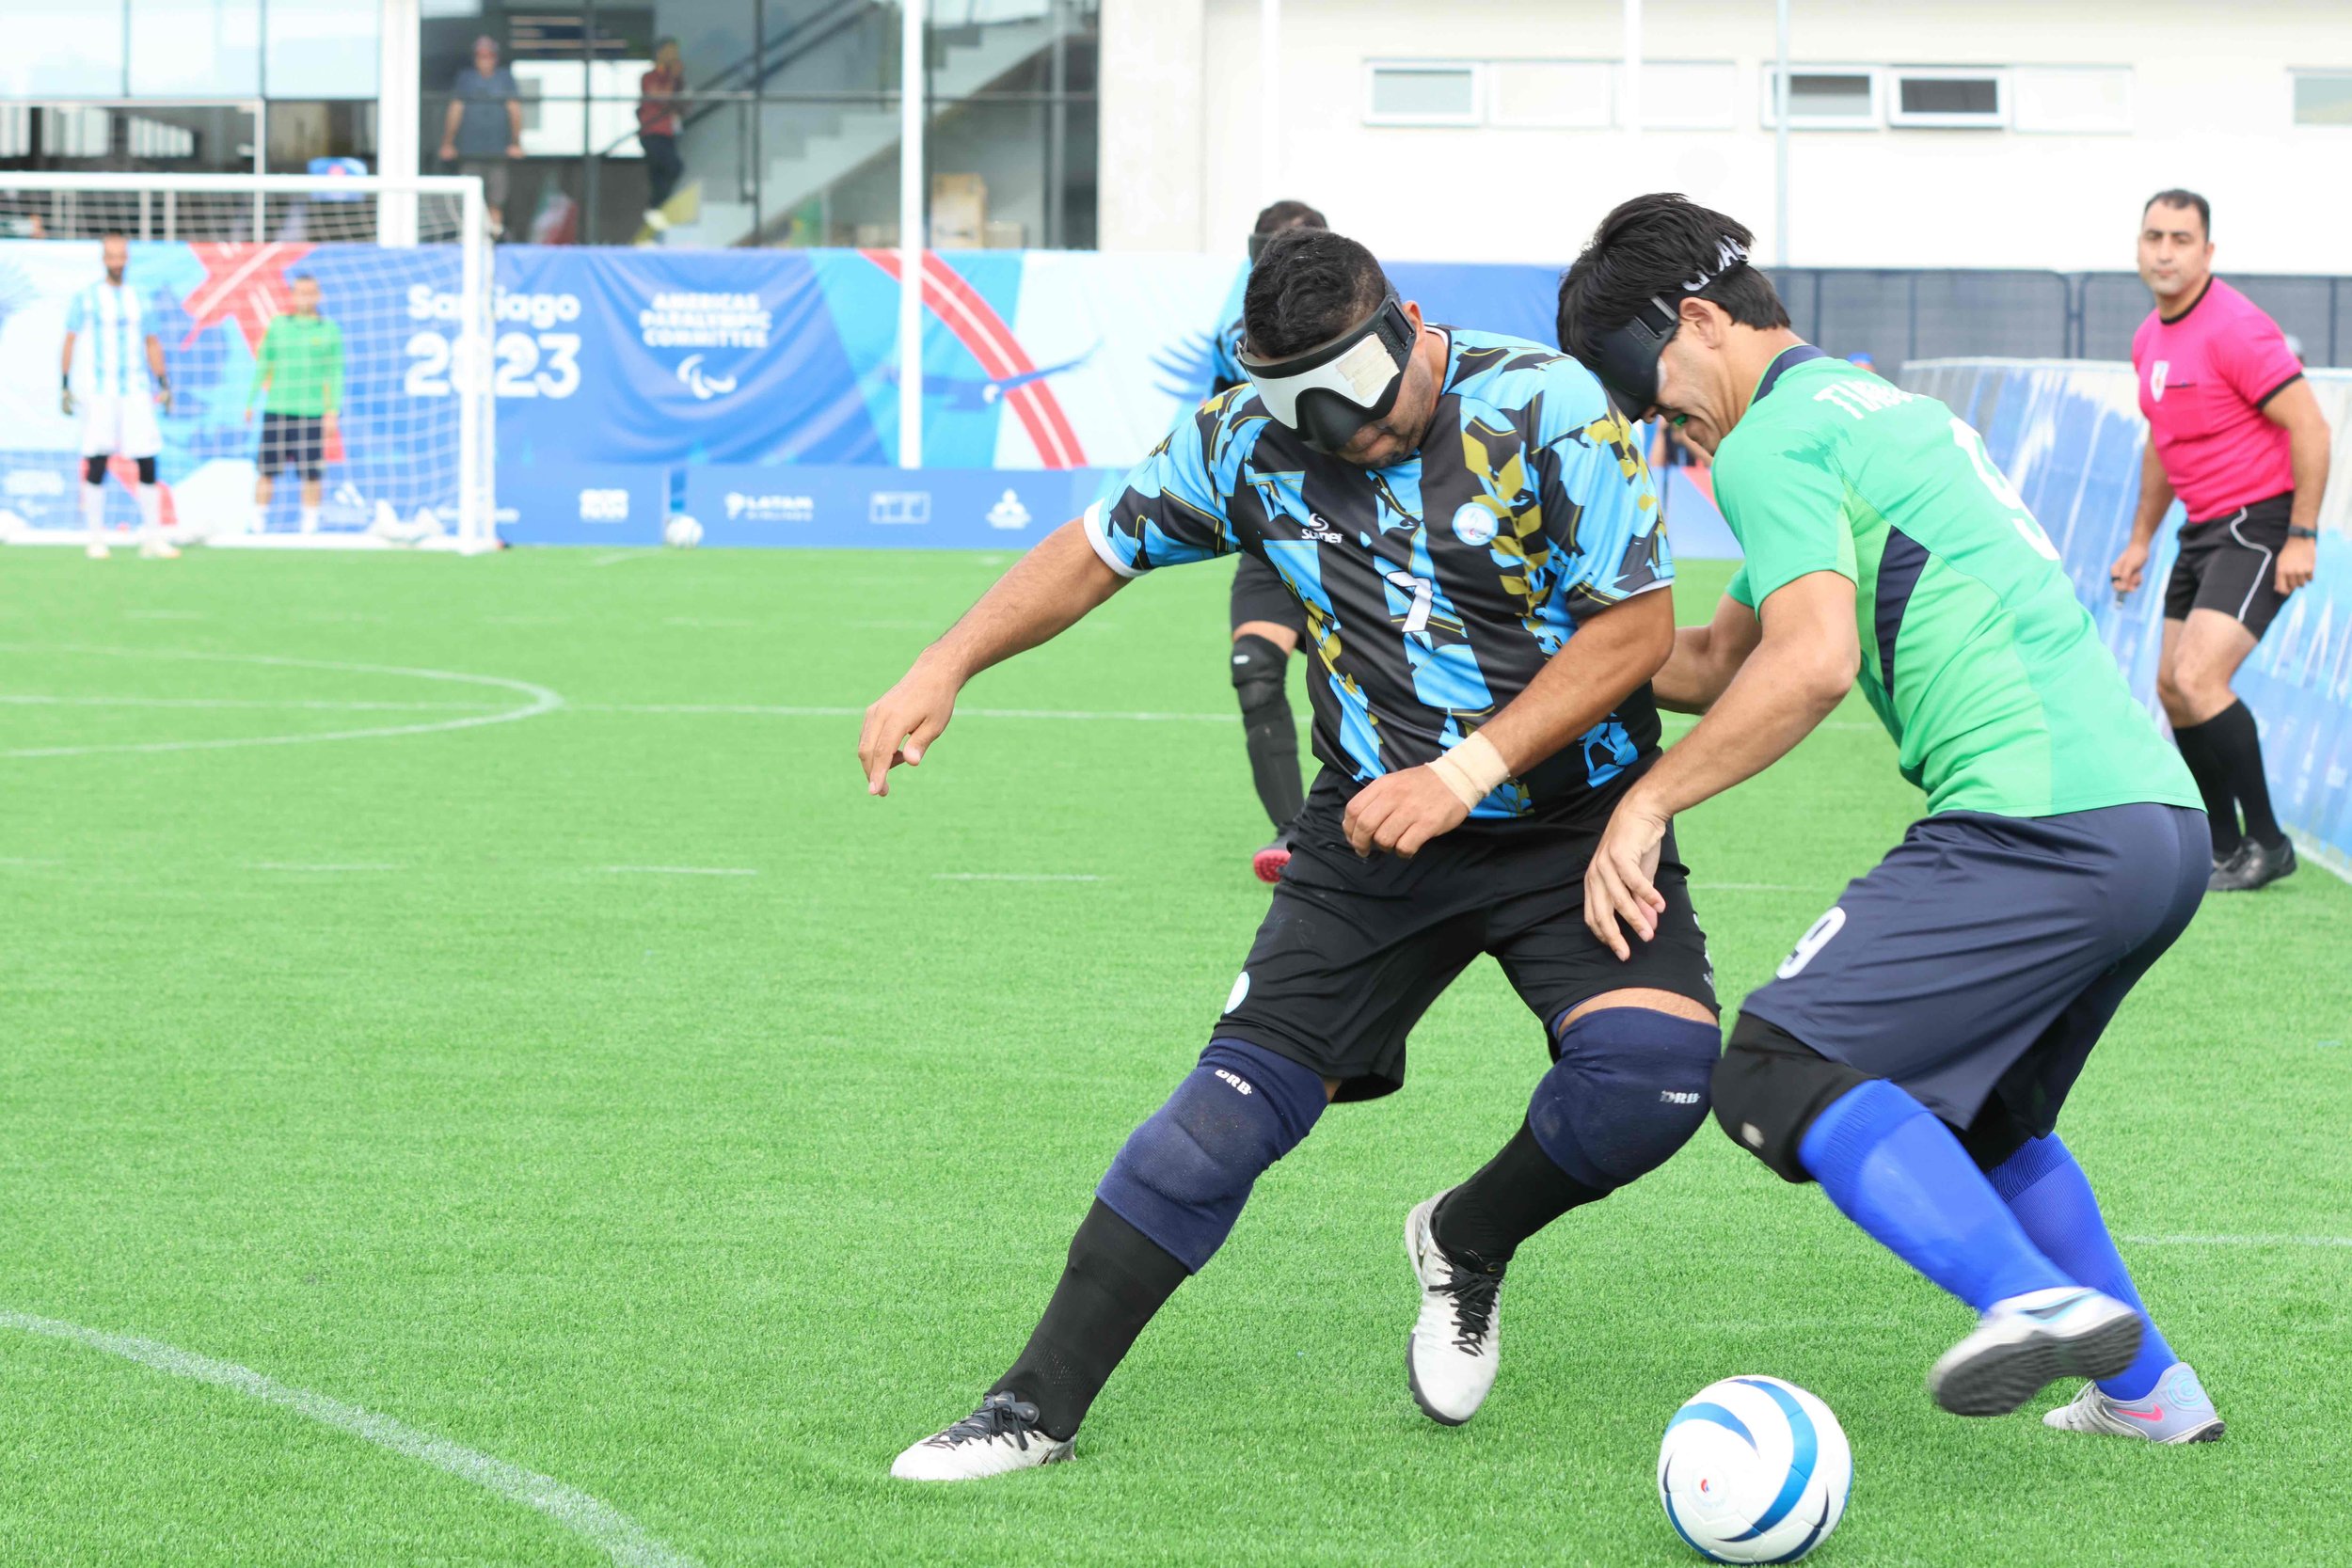 Two blind soccer players compete over a soccer ball in the middle of the field.